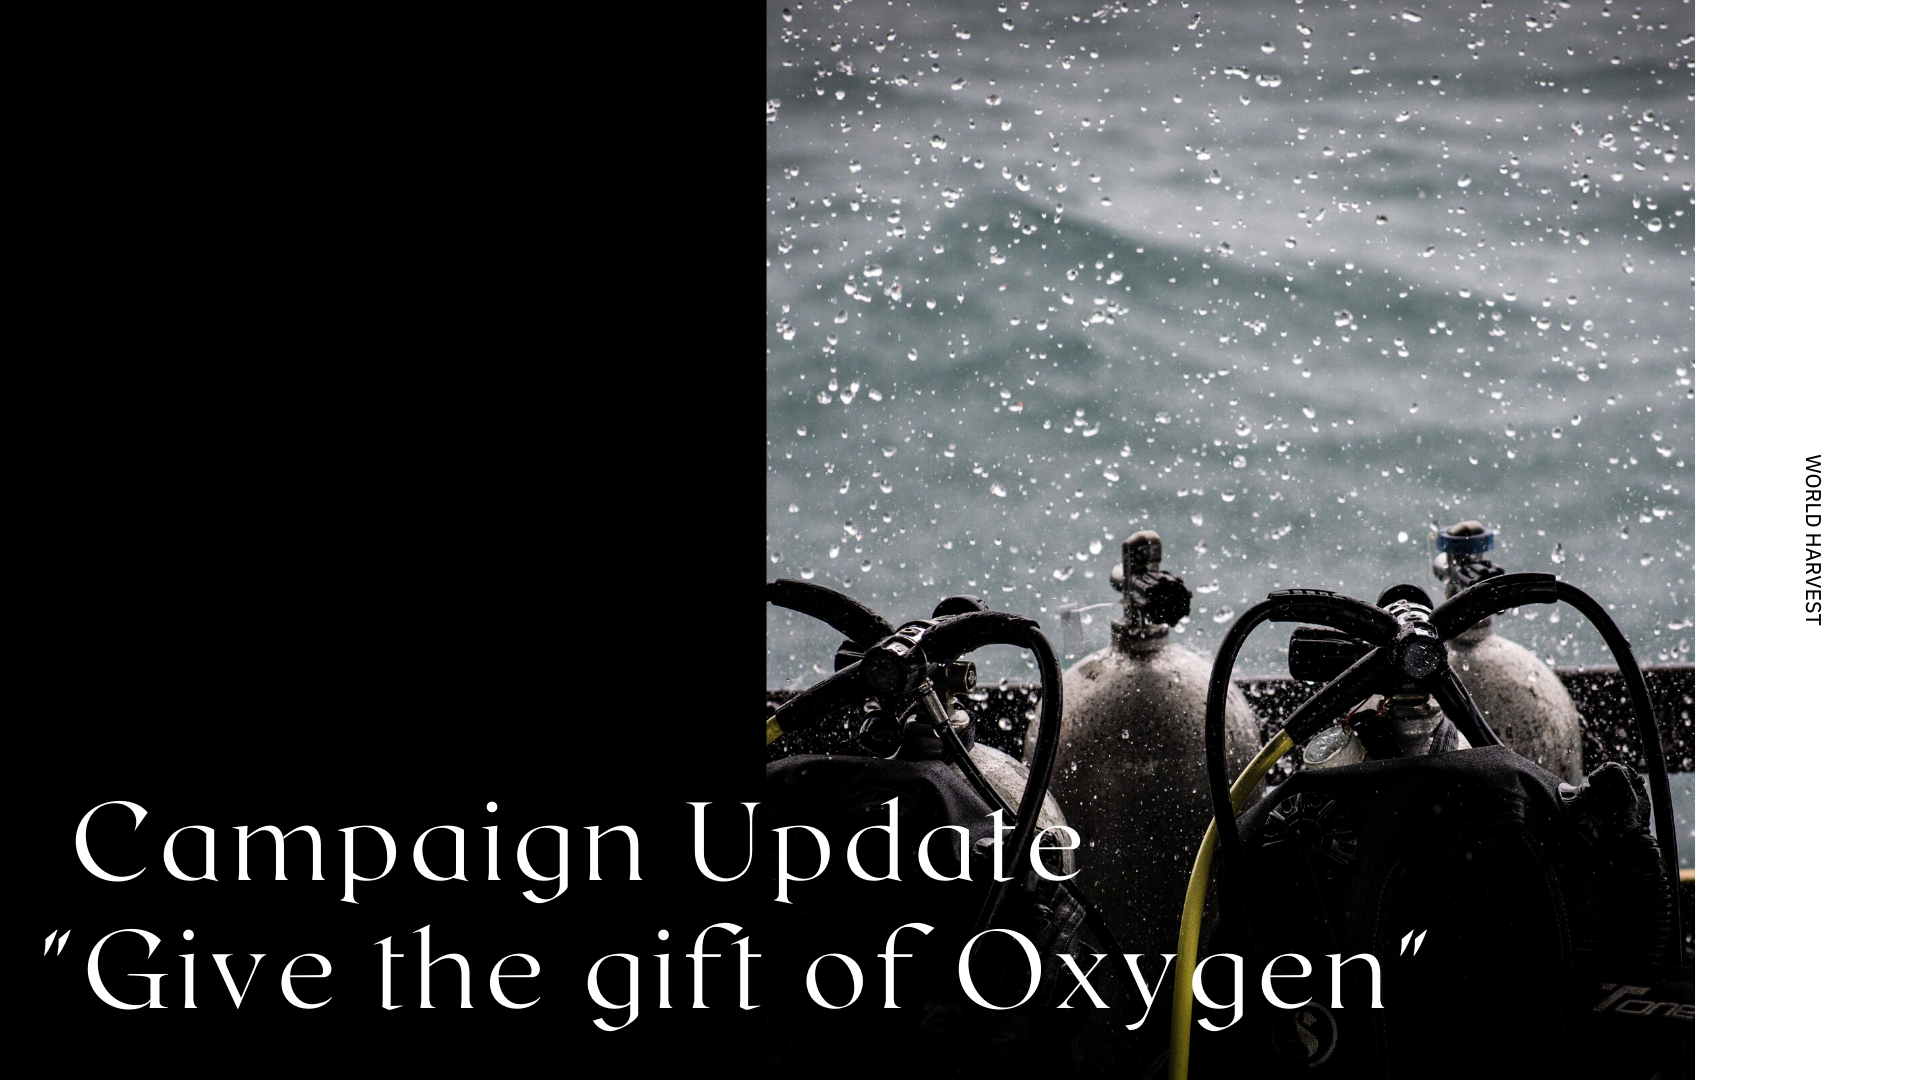 Campaign Update "Give the gift of Oxygen"